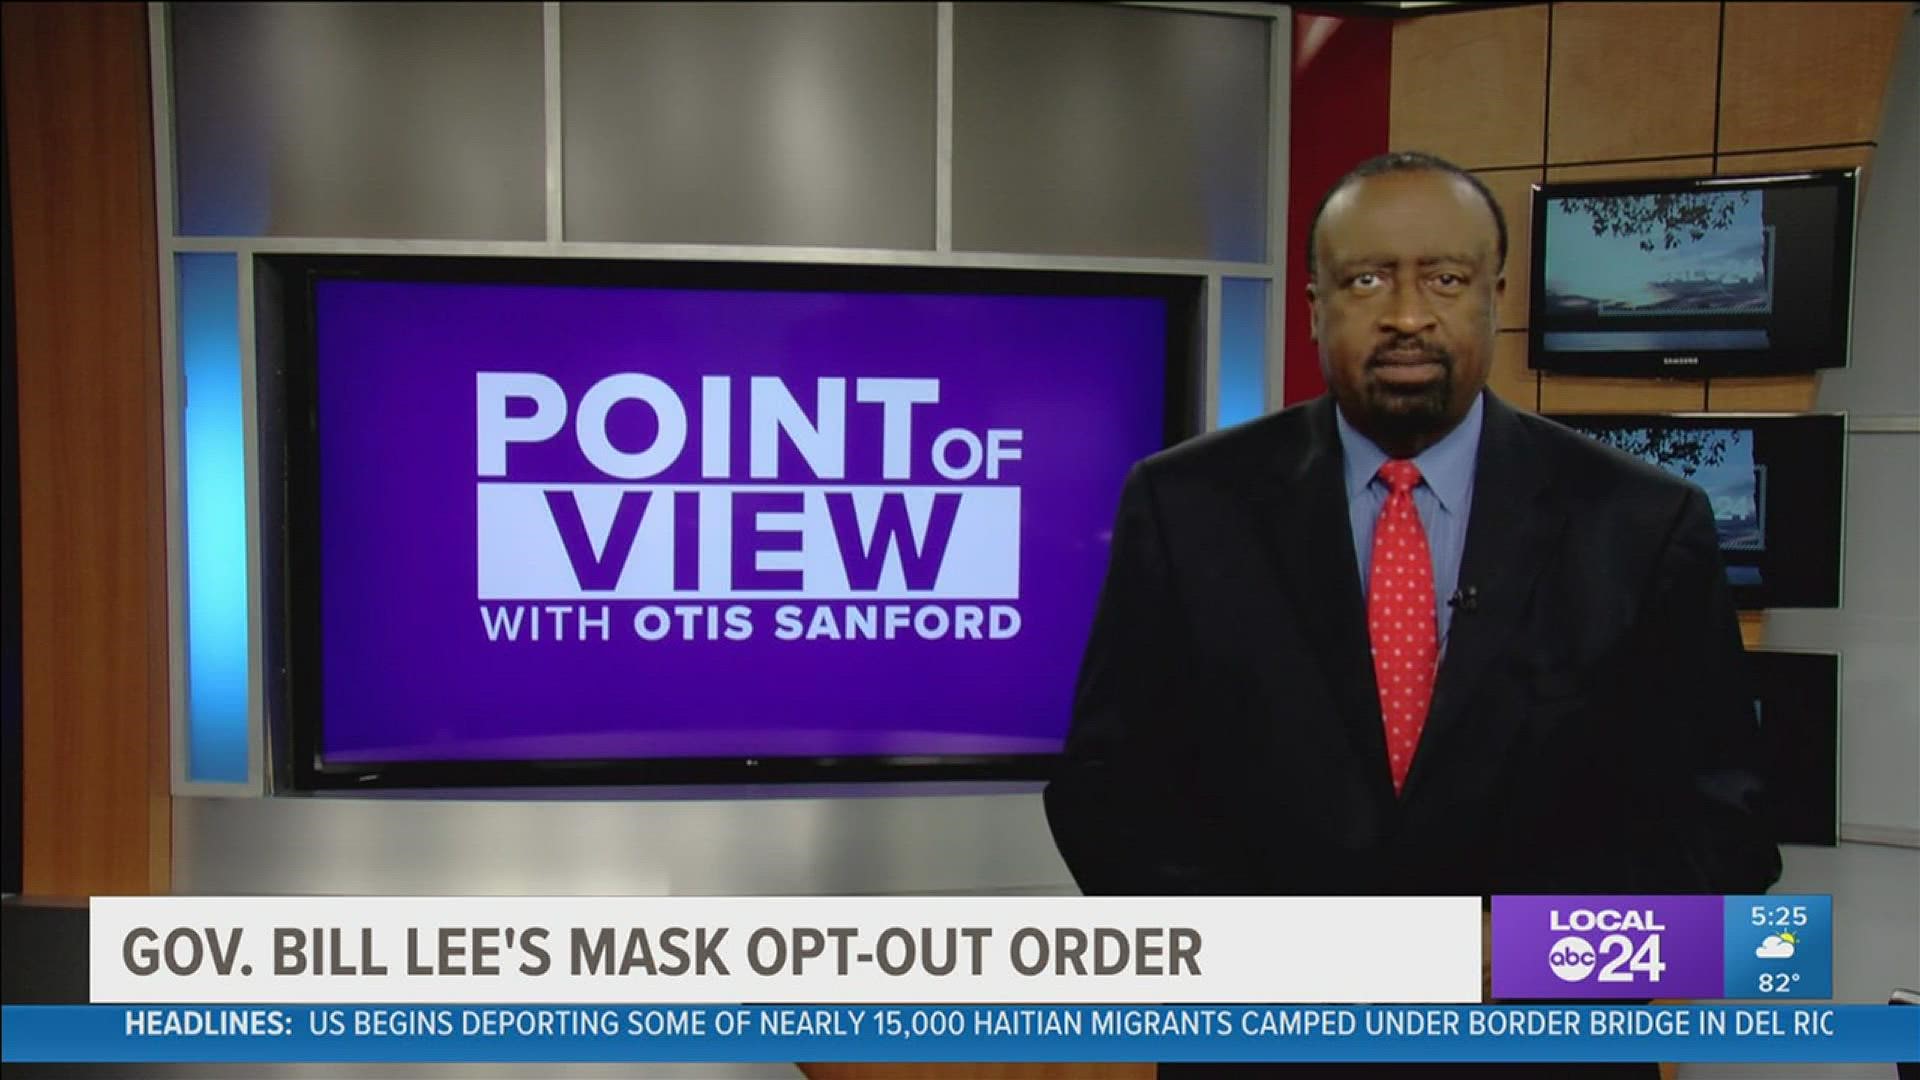 Political analyst and commentator Otis Sanford shared his point of view on the federal judge’s ruling on Gov. Lee’s mask opt-out order.